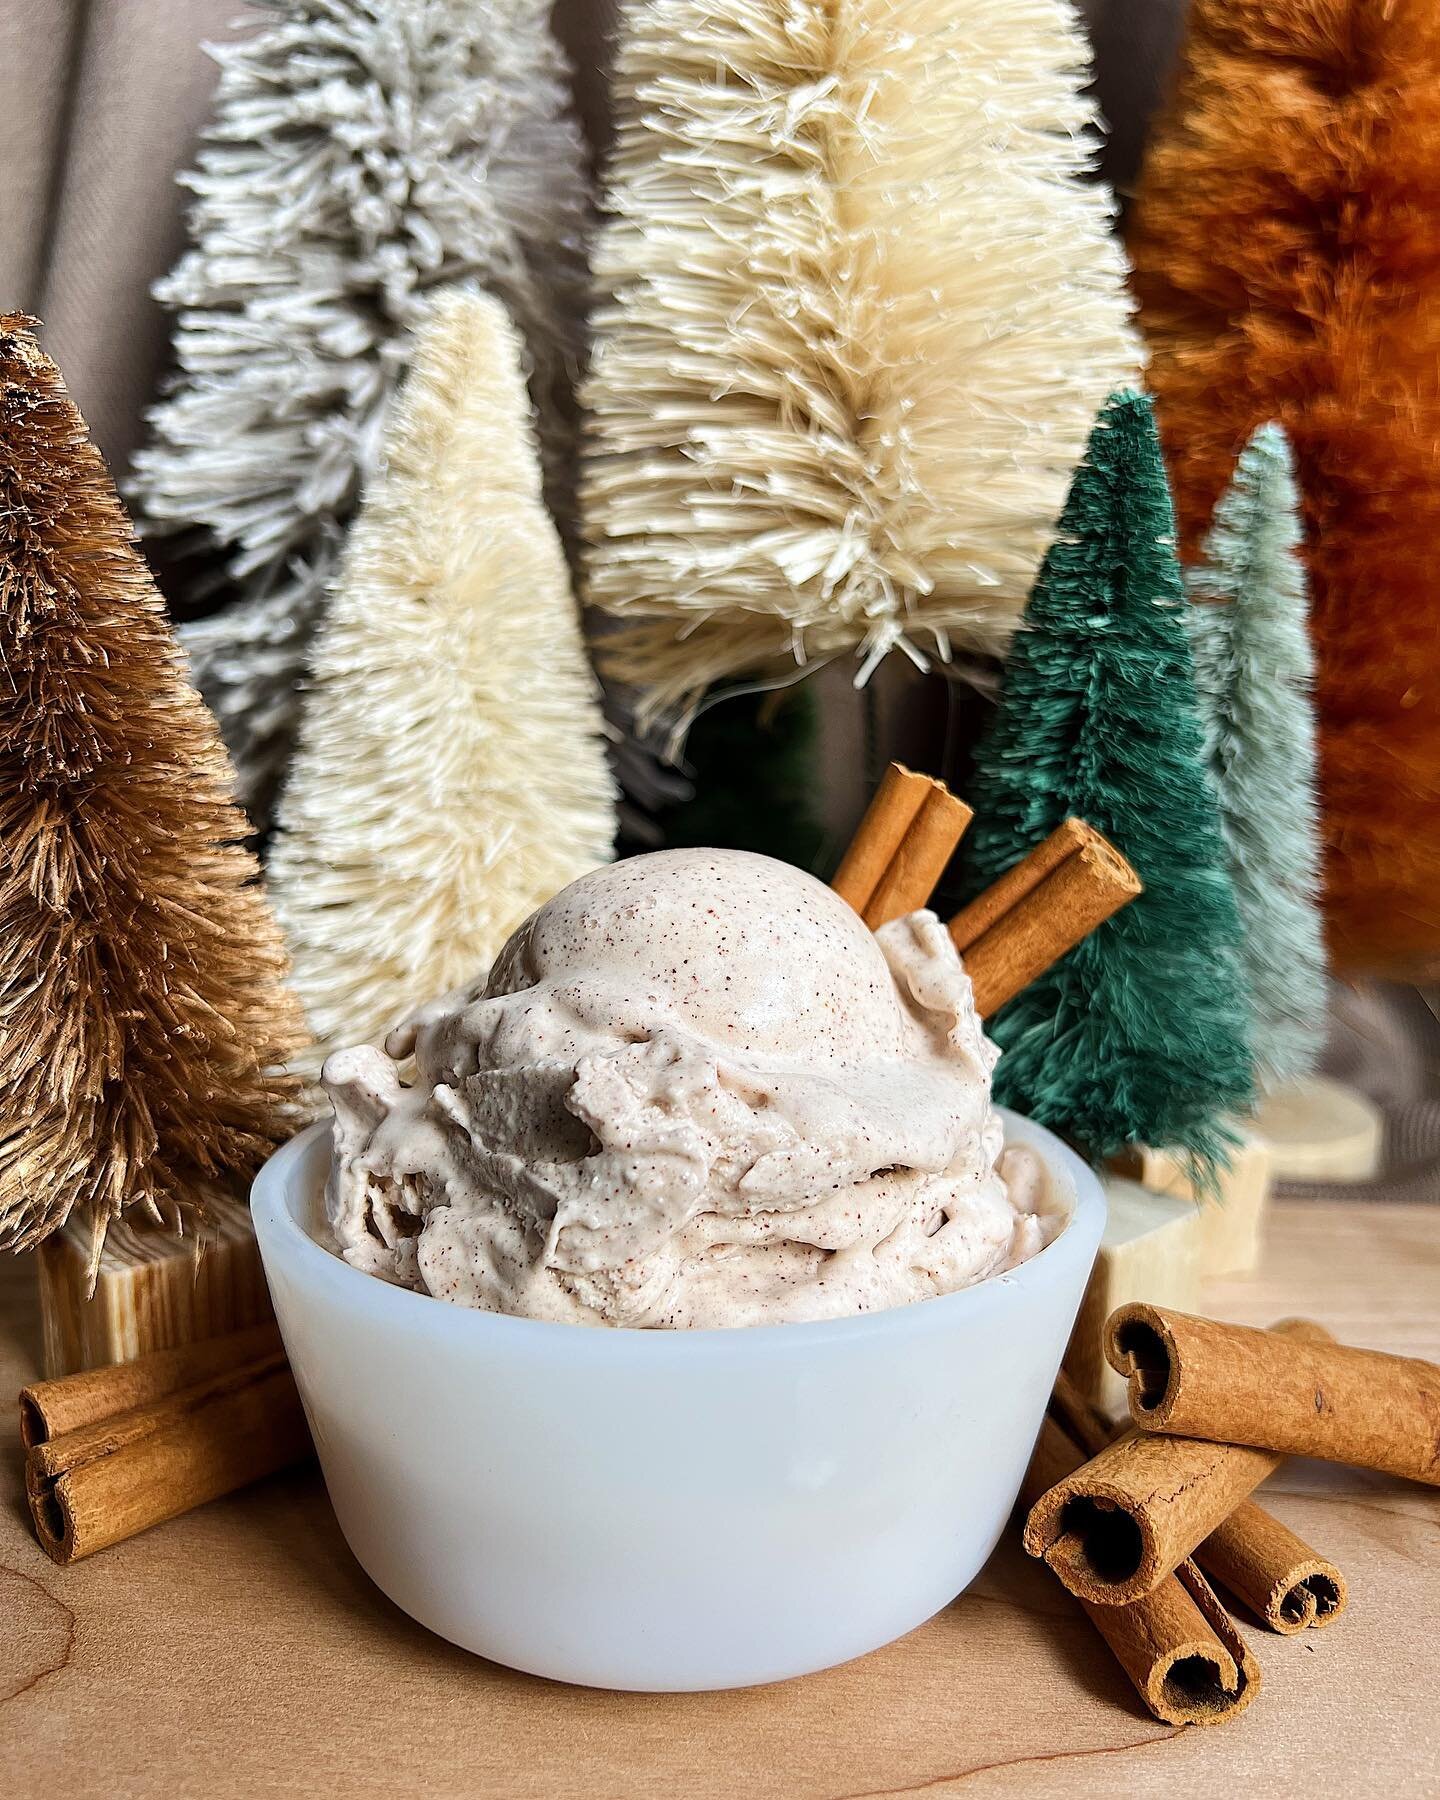 Grab the sweats, start the fire, and cozy up with a bowl of our Cinnamon nitrogen ice cream!! Perfect balance of our vanilla cream and all the cinnamon to warm the soul. #nitrogenicecream #cinnamon #winterblues #icecreamlover #nitroicecream #nitro #a